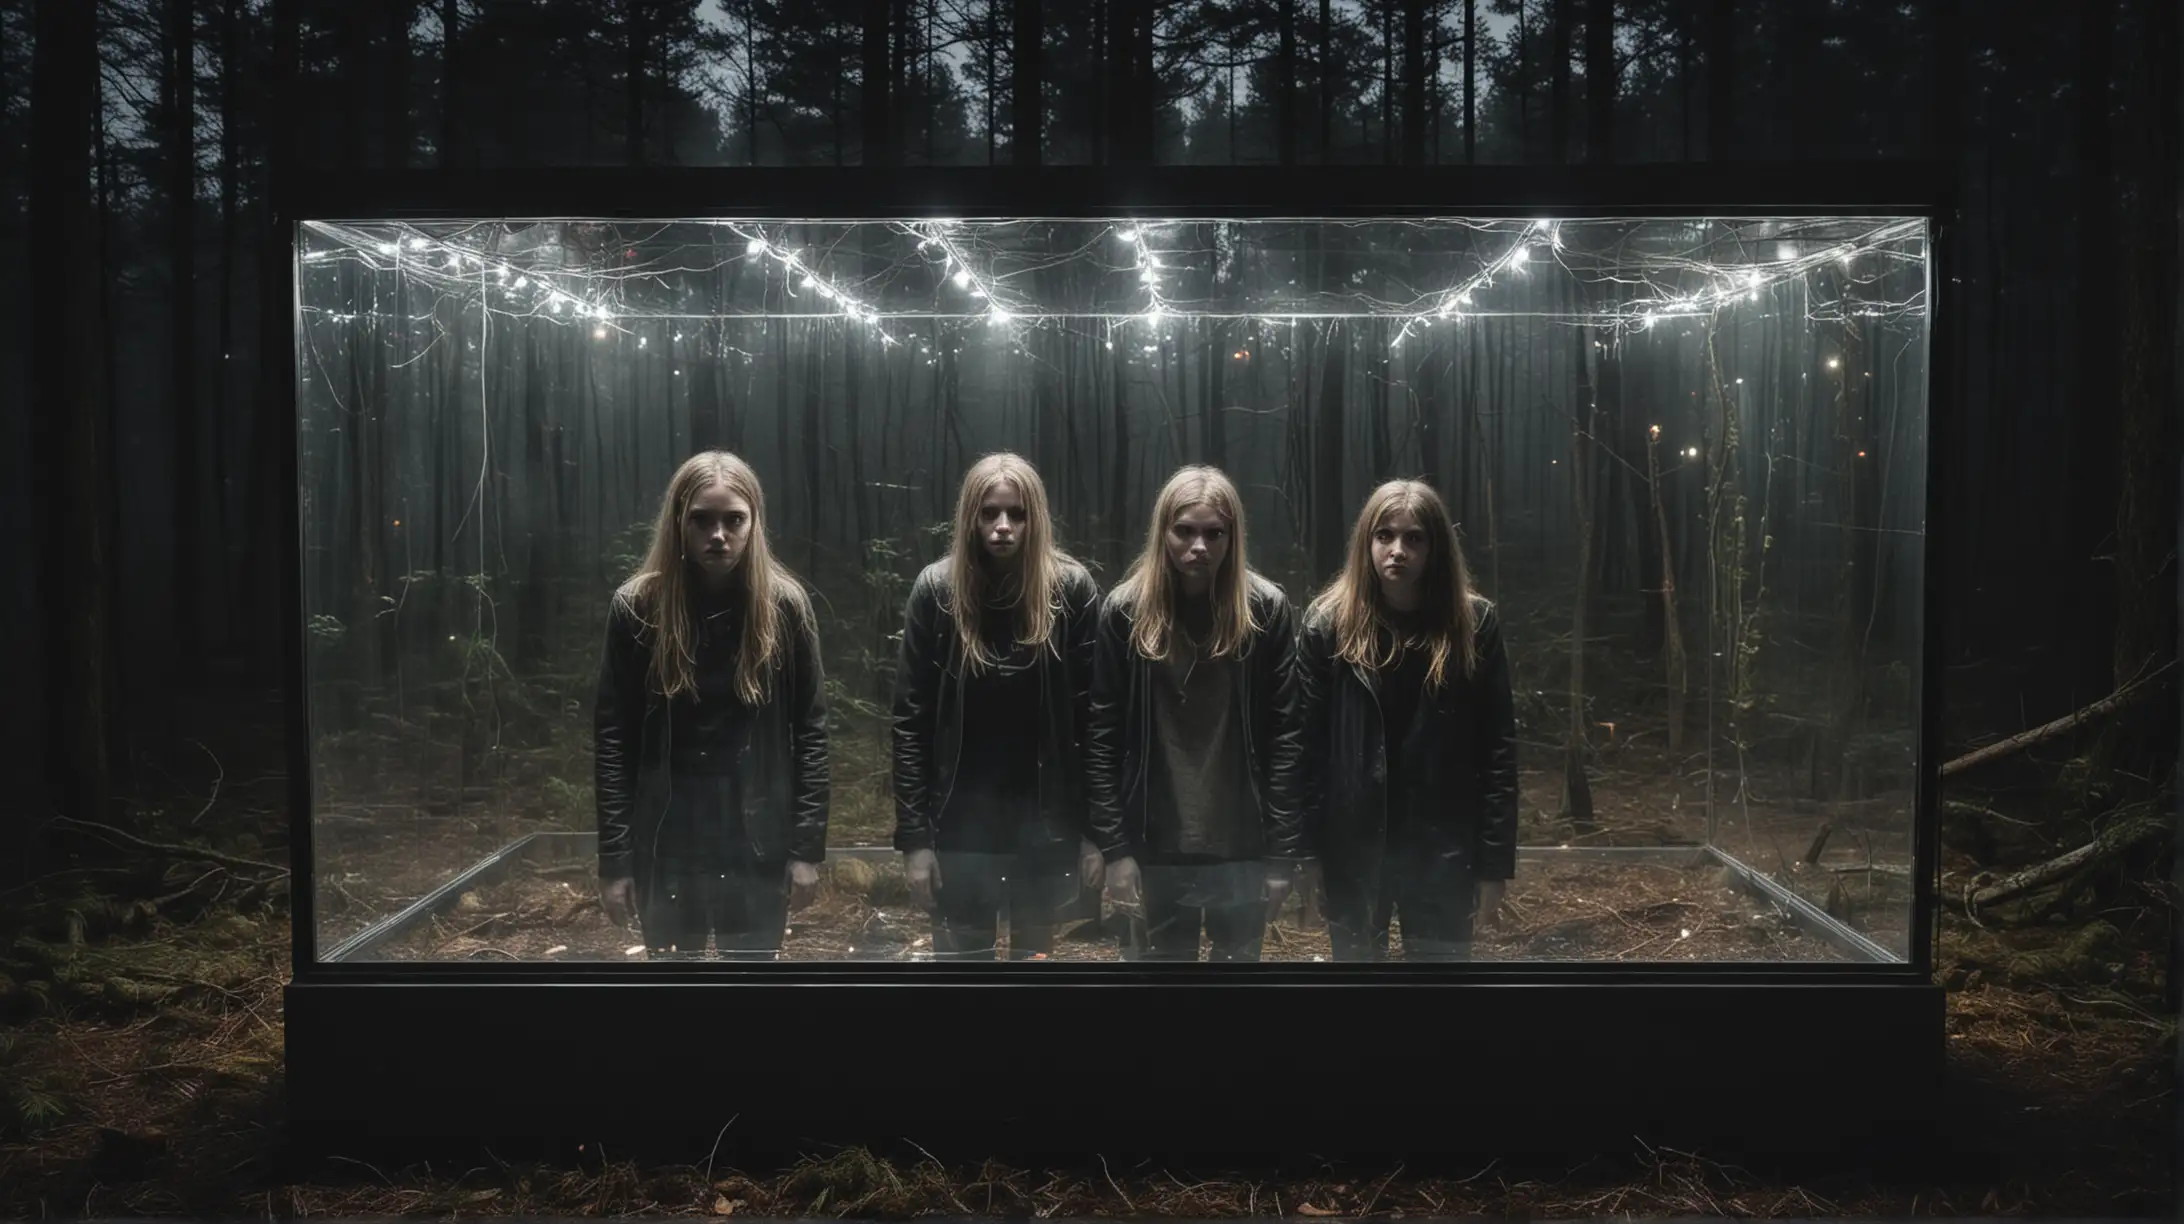 Four People in Illuminated Glass Box Amid Dark Scary Forest